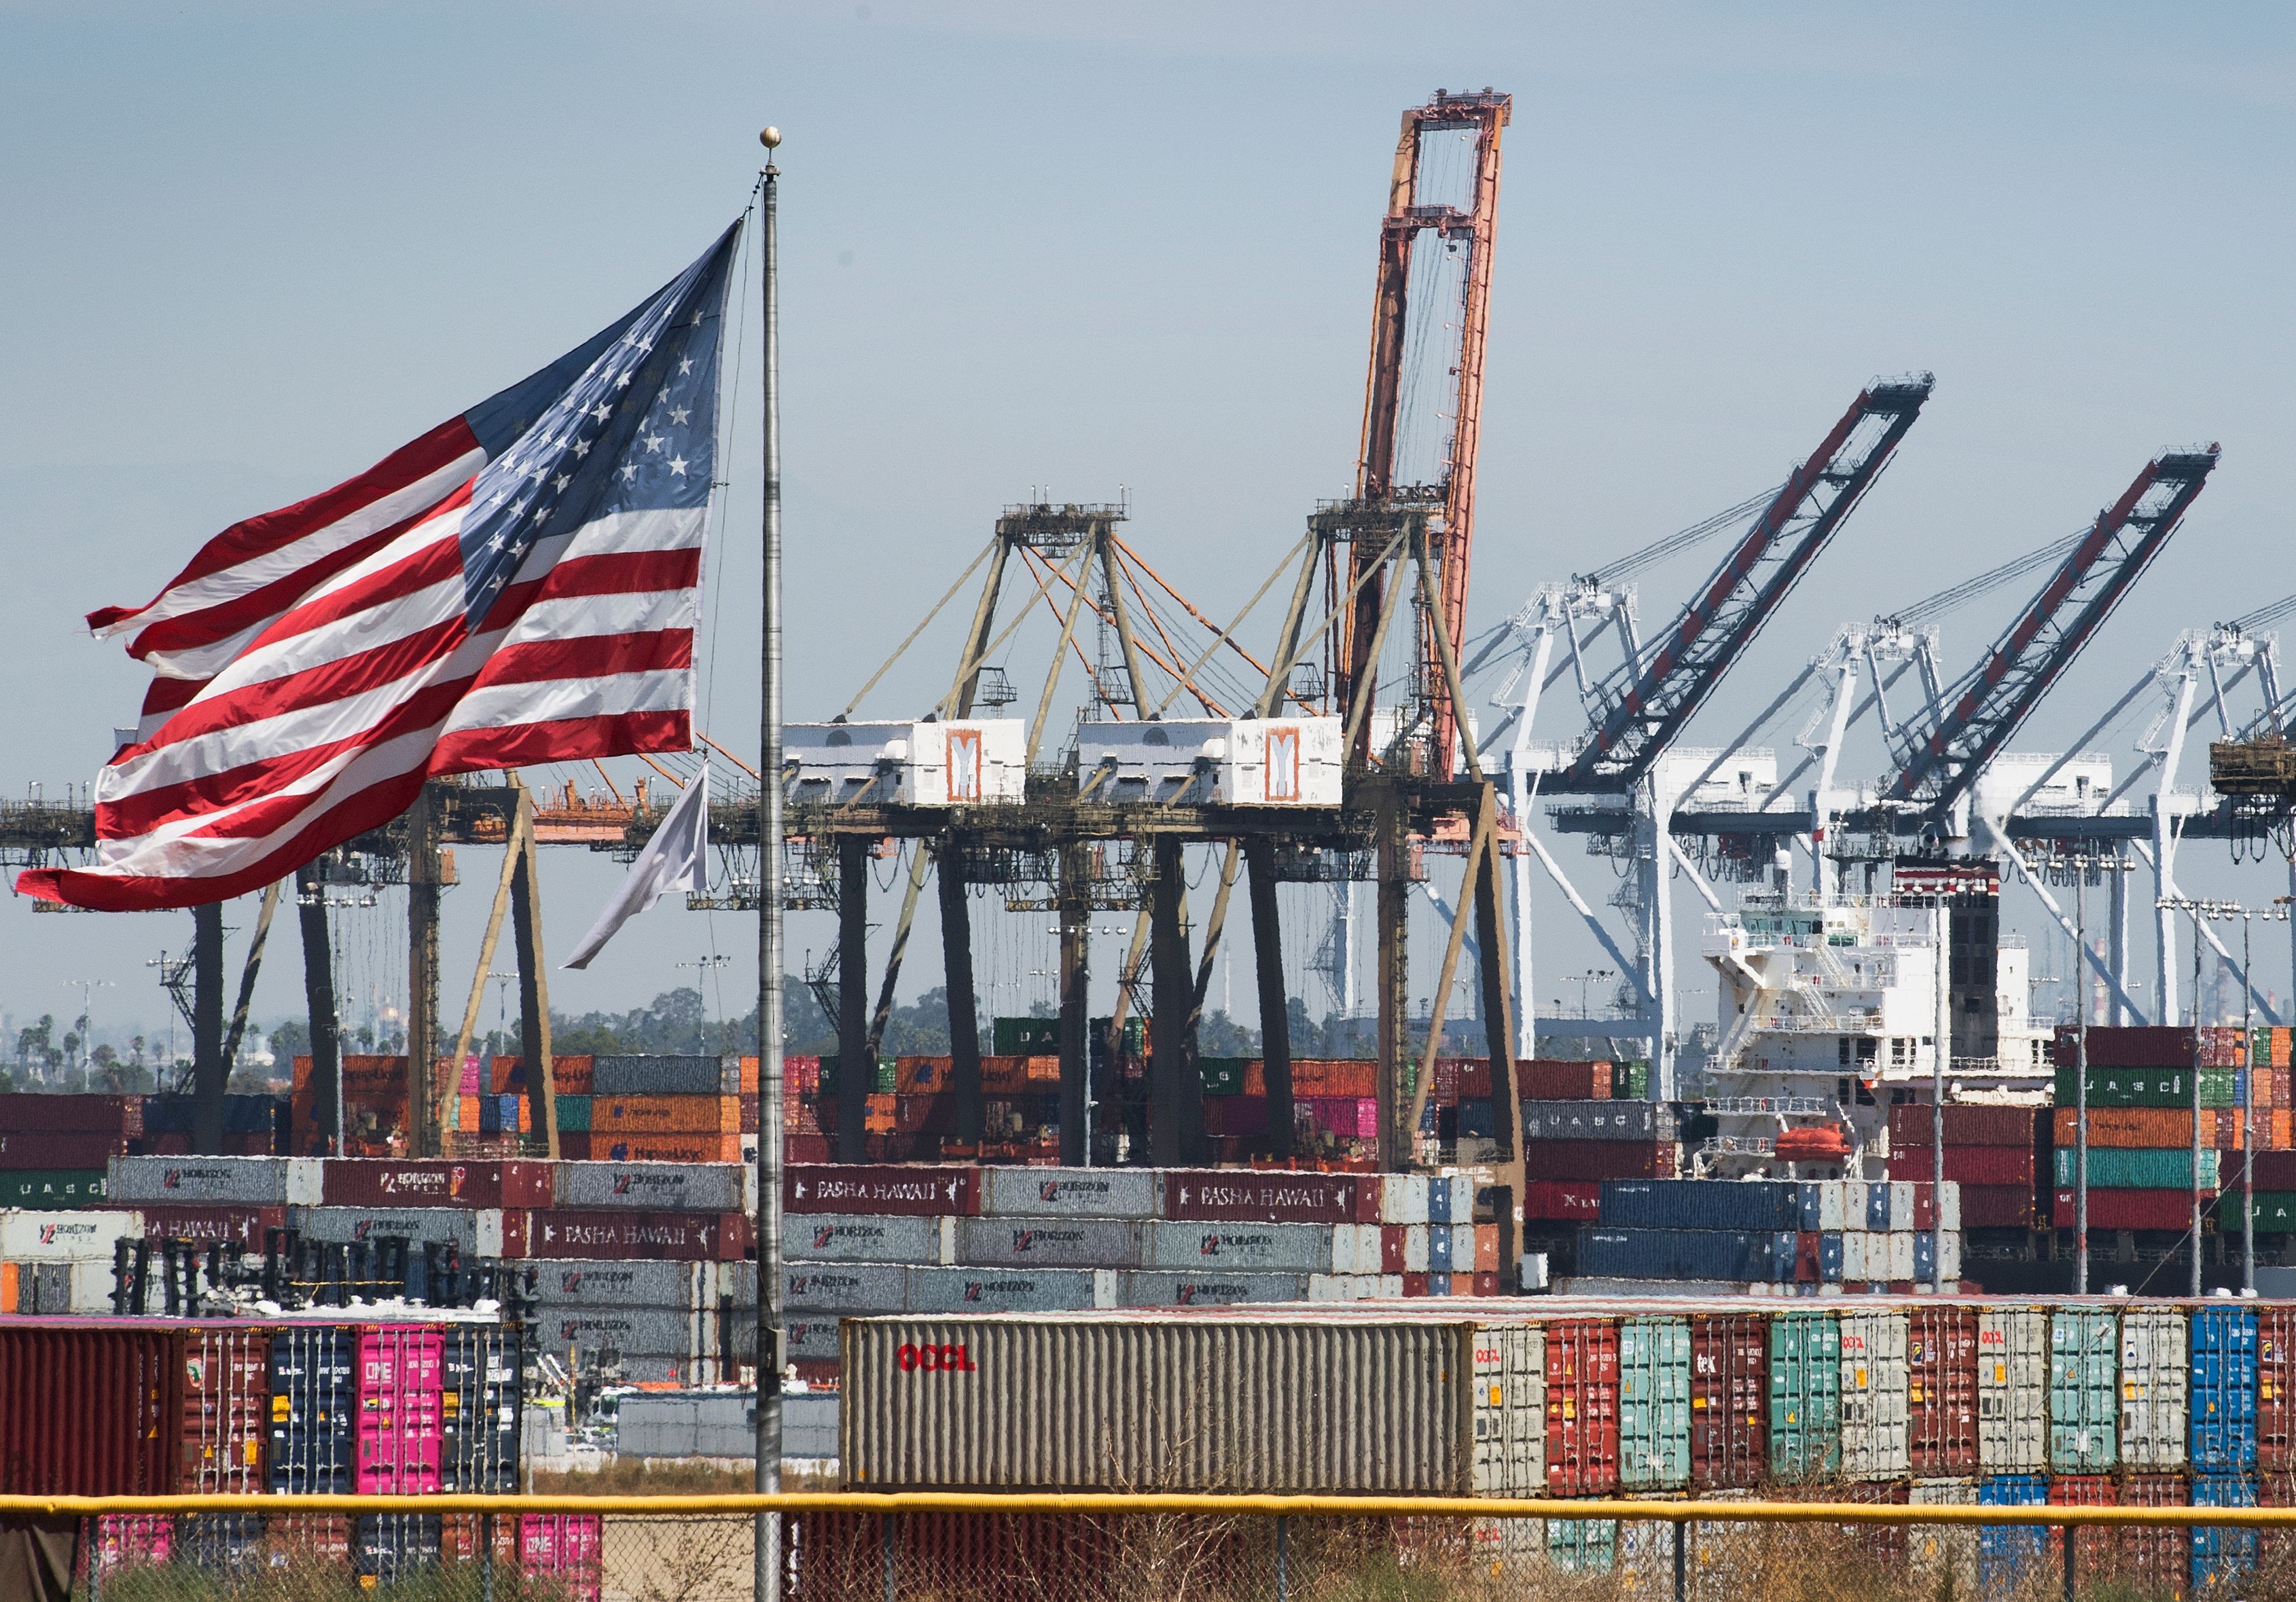 Shipping containers from China and other Asian countries are unloaded at the Port of Los Angeles. A trade war has been raging for well over a year between the US and China. Photo: AFP